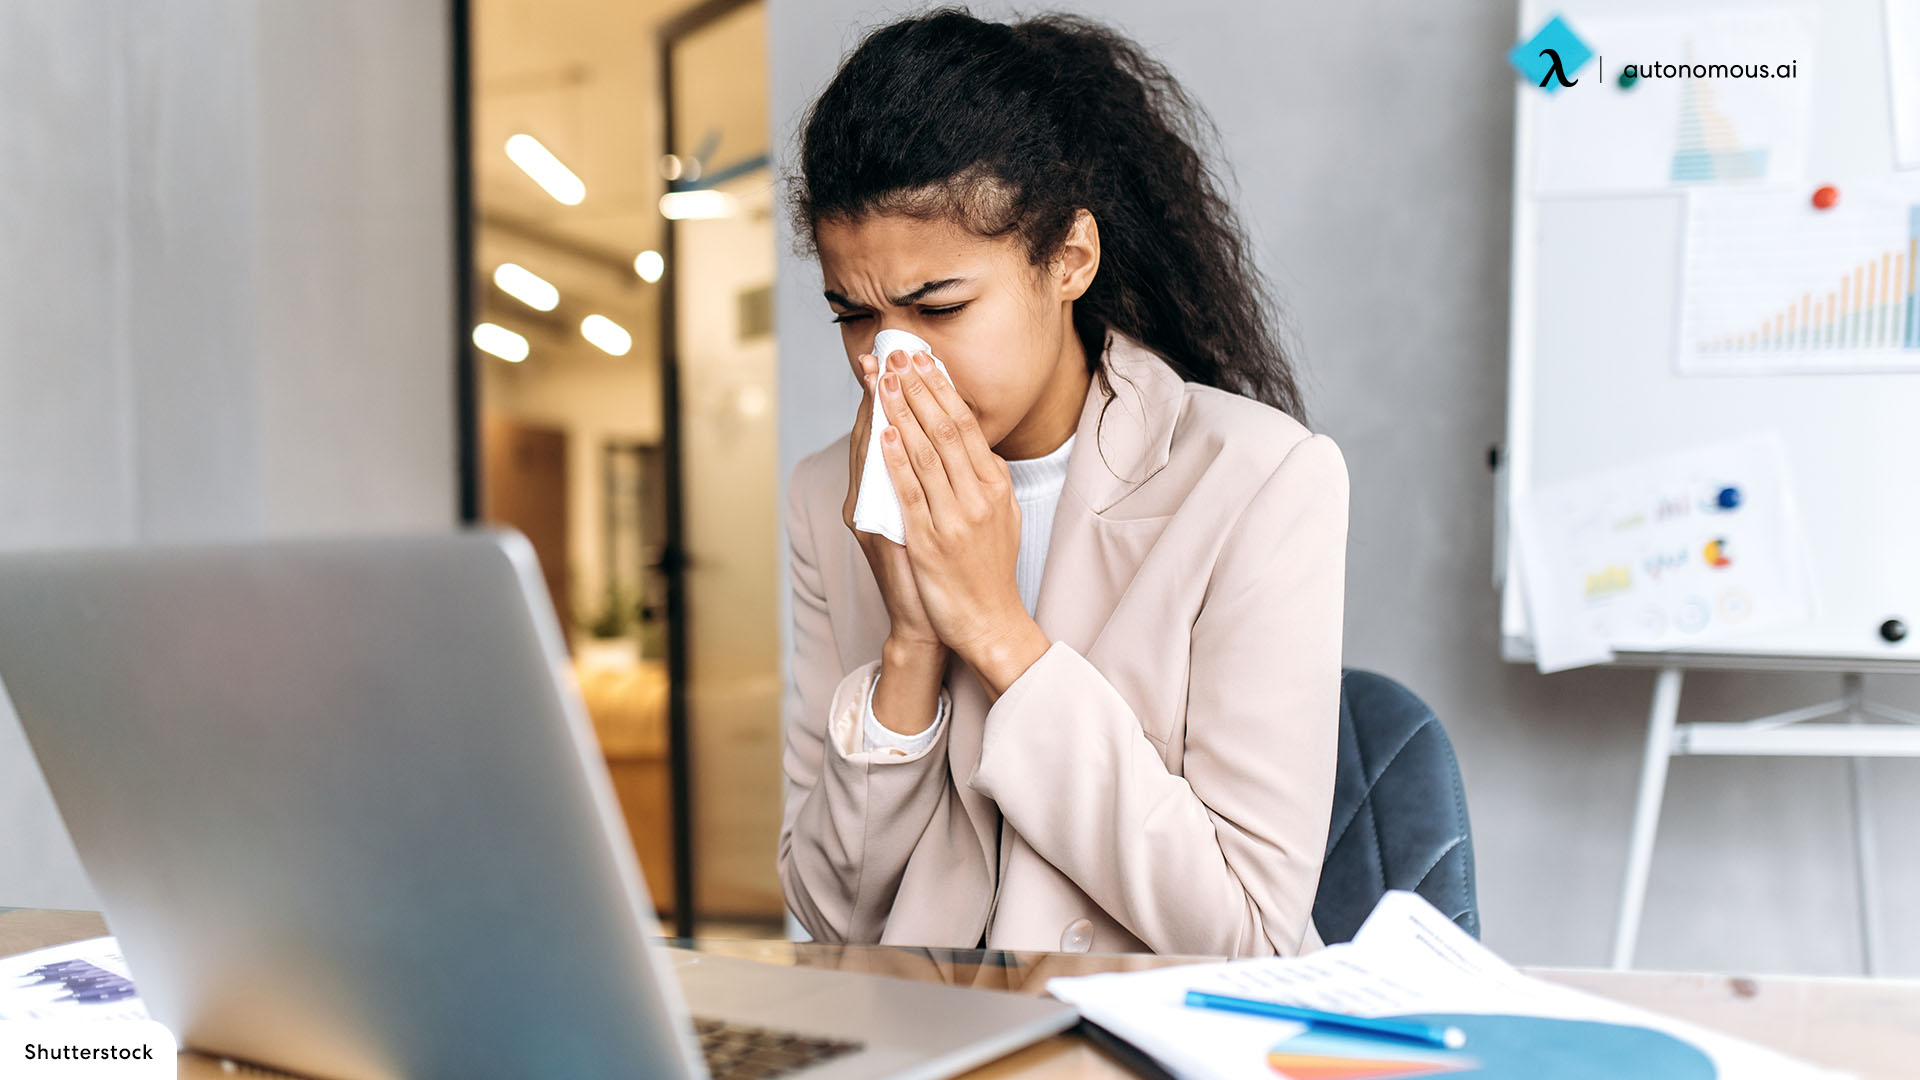 What Can You Do to Manage Allergens in the Workplace